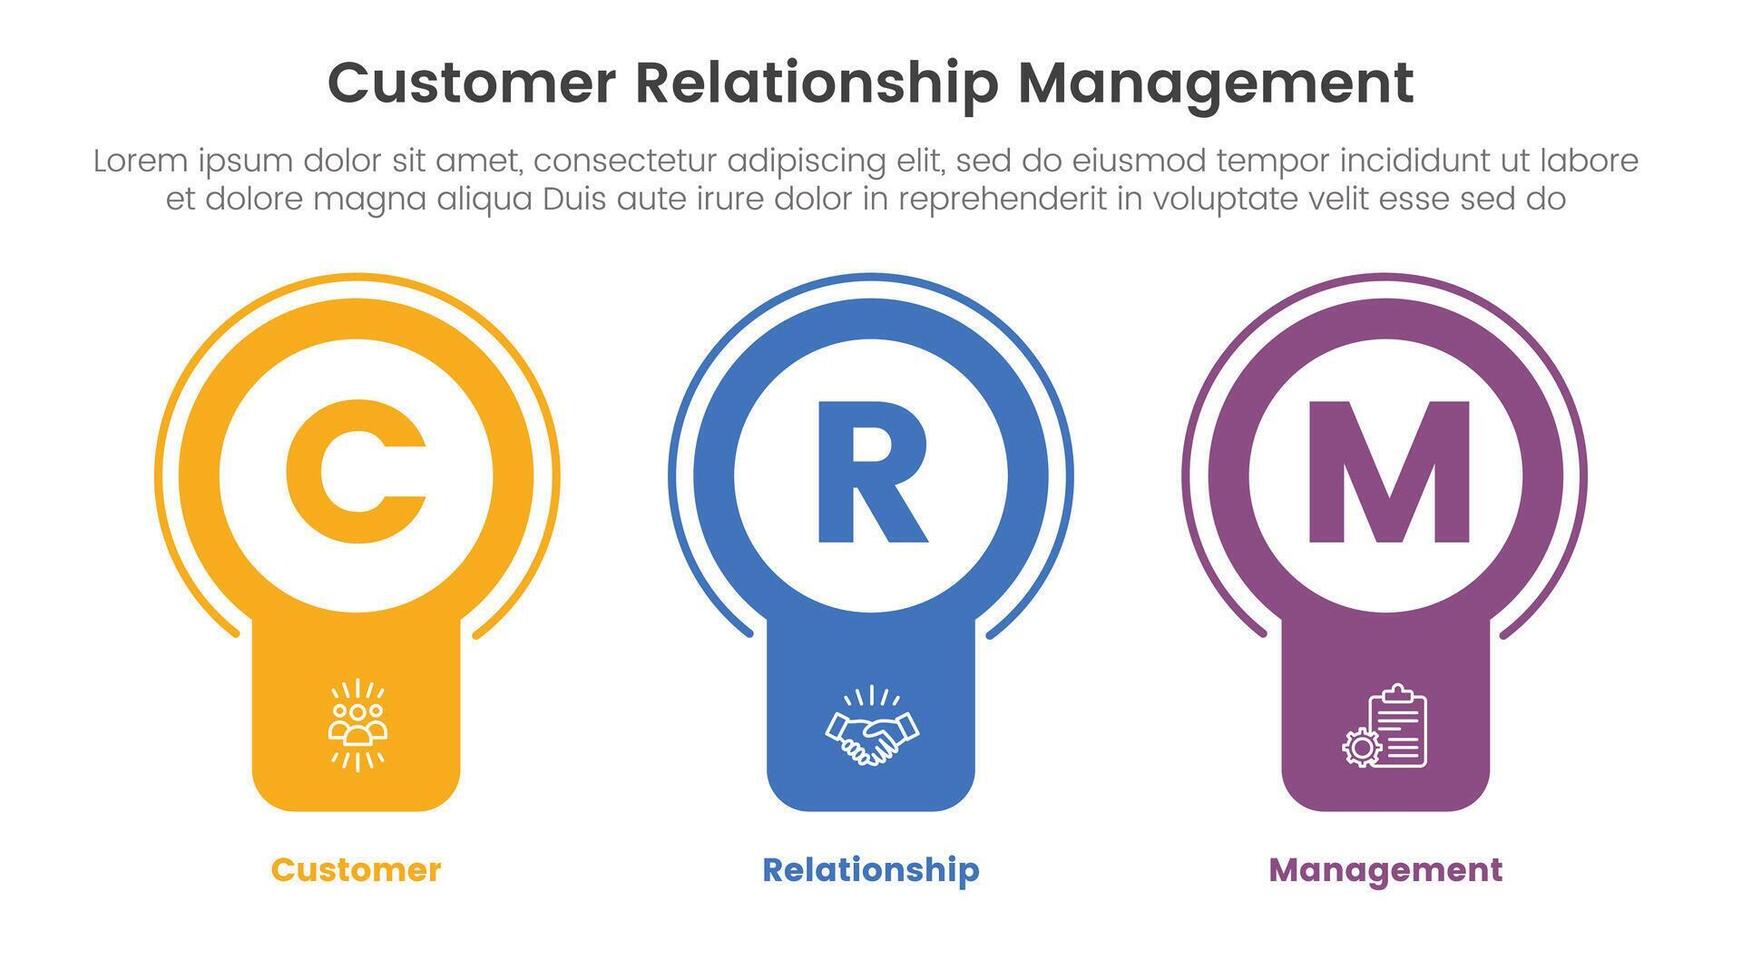 CRM customer relationship management infographic 3 point stage template with badge circle banner shape for slide presentation vector